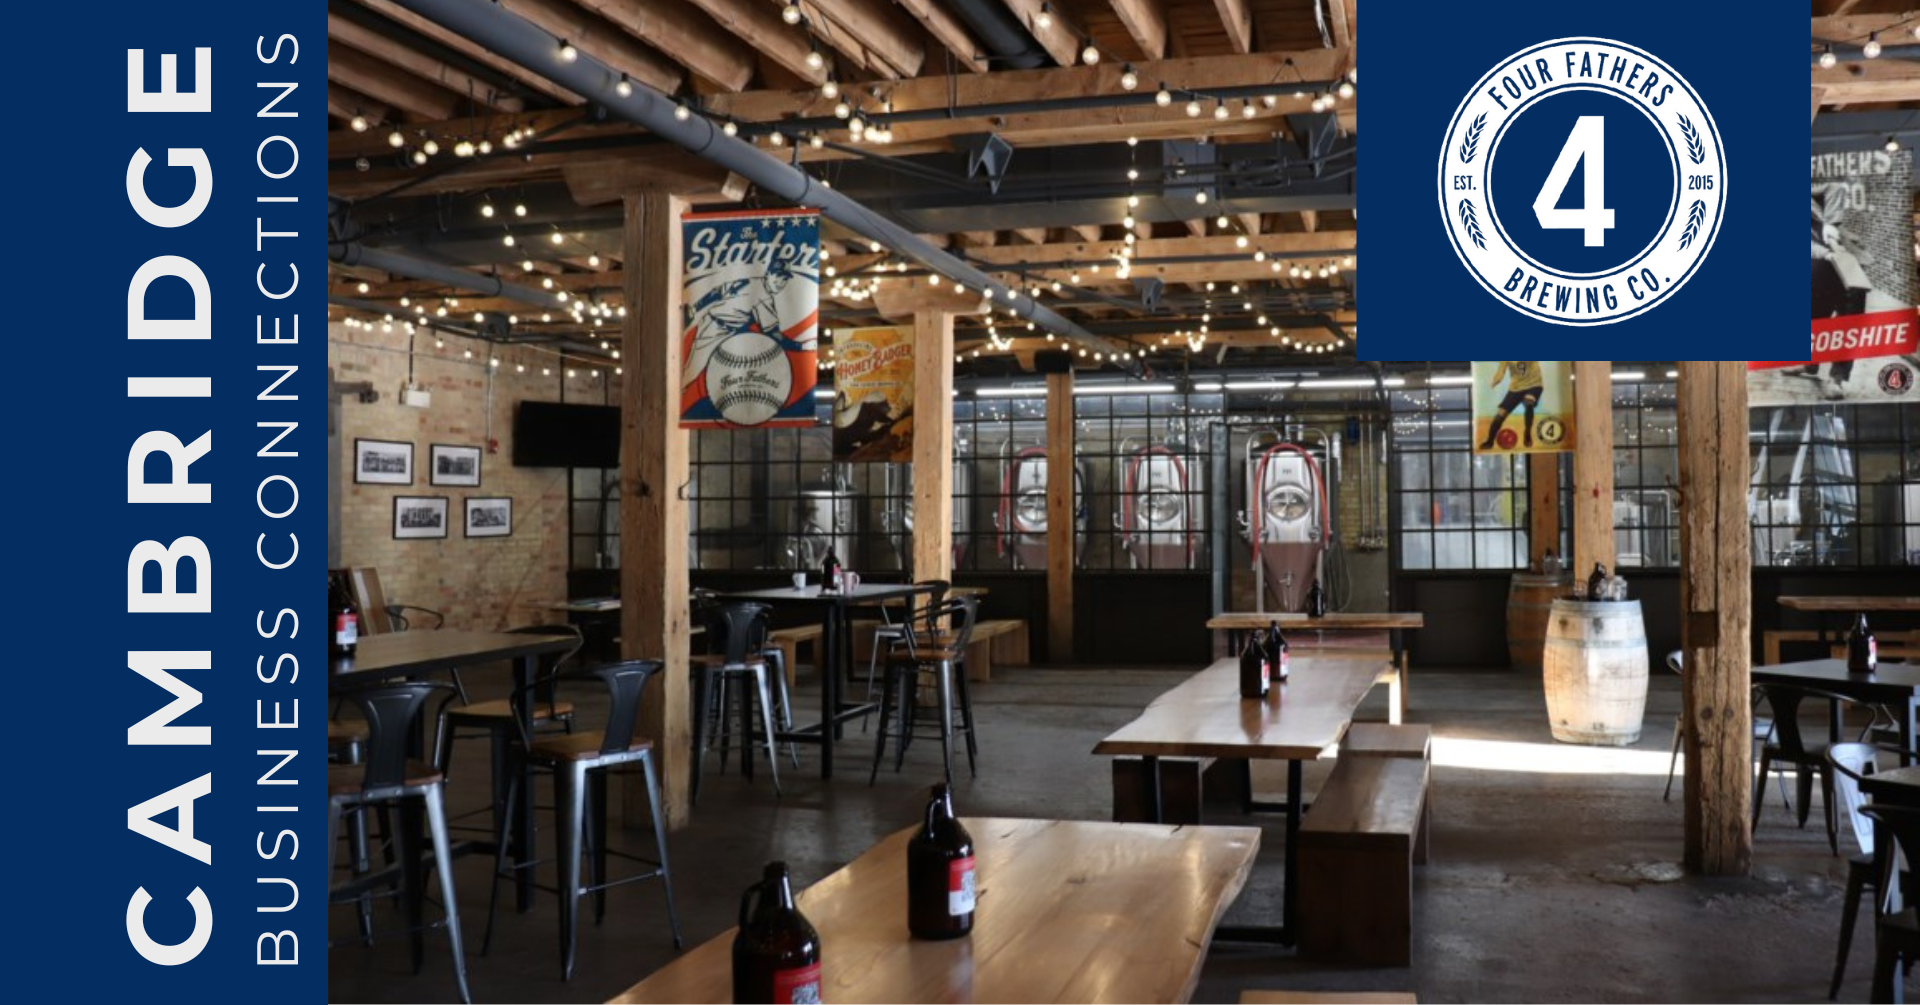 Faceboo Event Header - Four Fathers Brewing Co.